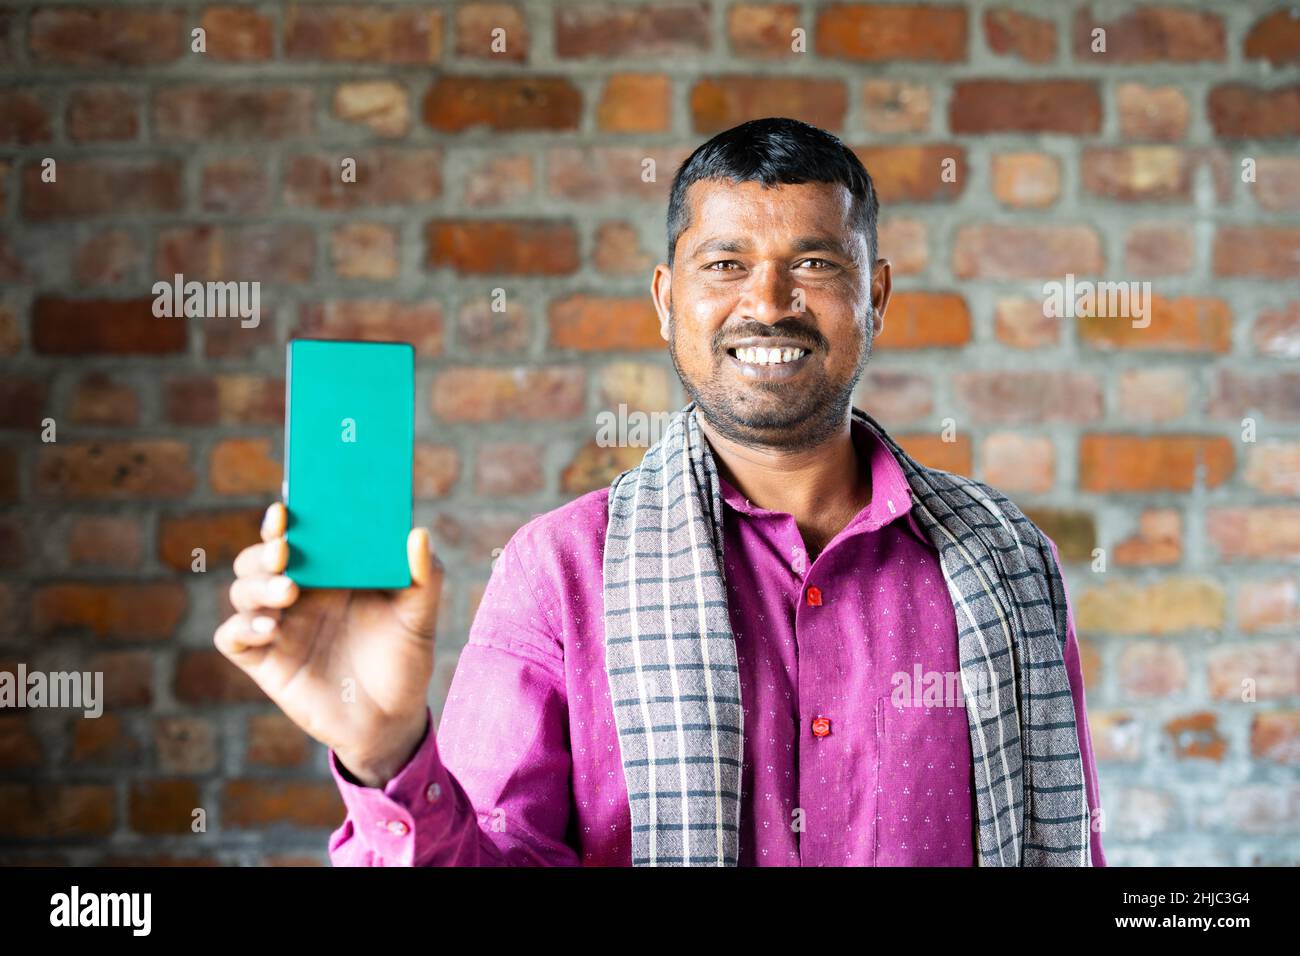 rack focus shot of indian daily wager showing green screen mobile phone by looking at camera - concept of technology, blue collar job, advertisment Stock Photo